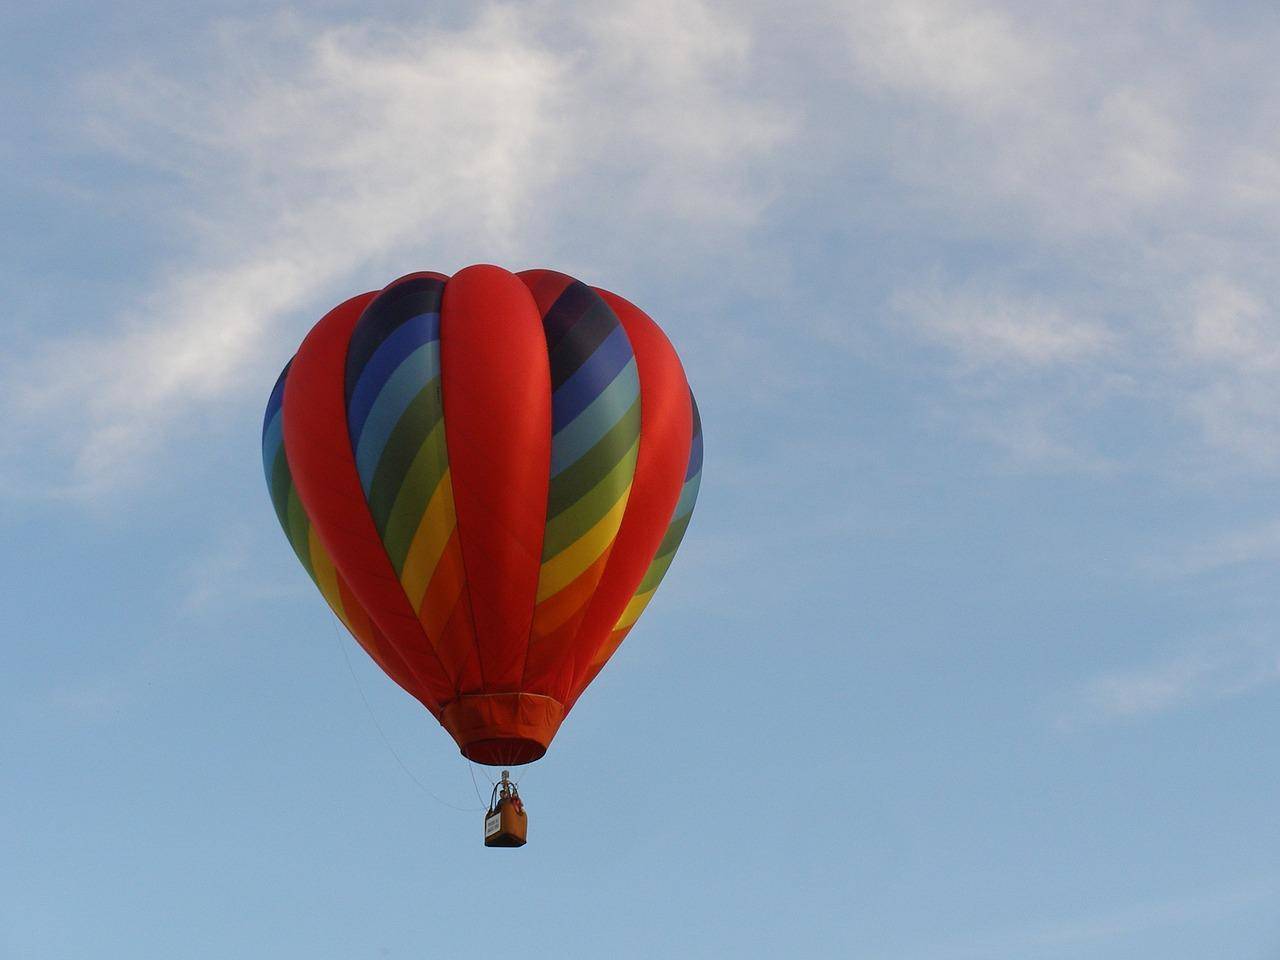 Who were the first passengers in the hot air balloon?